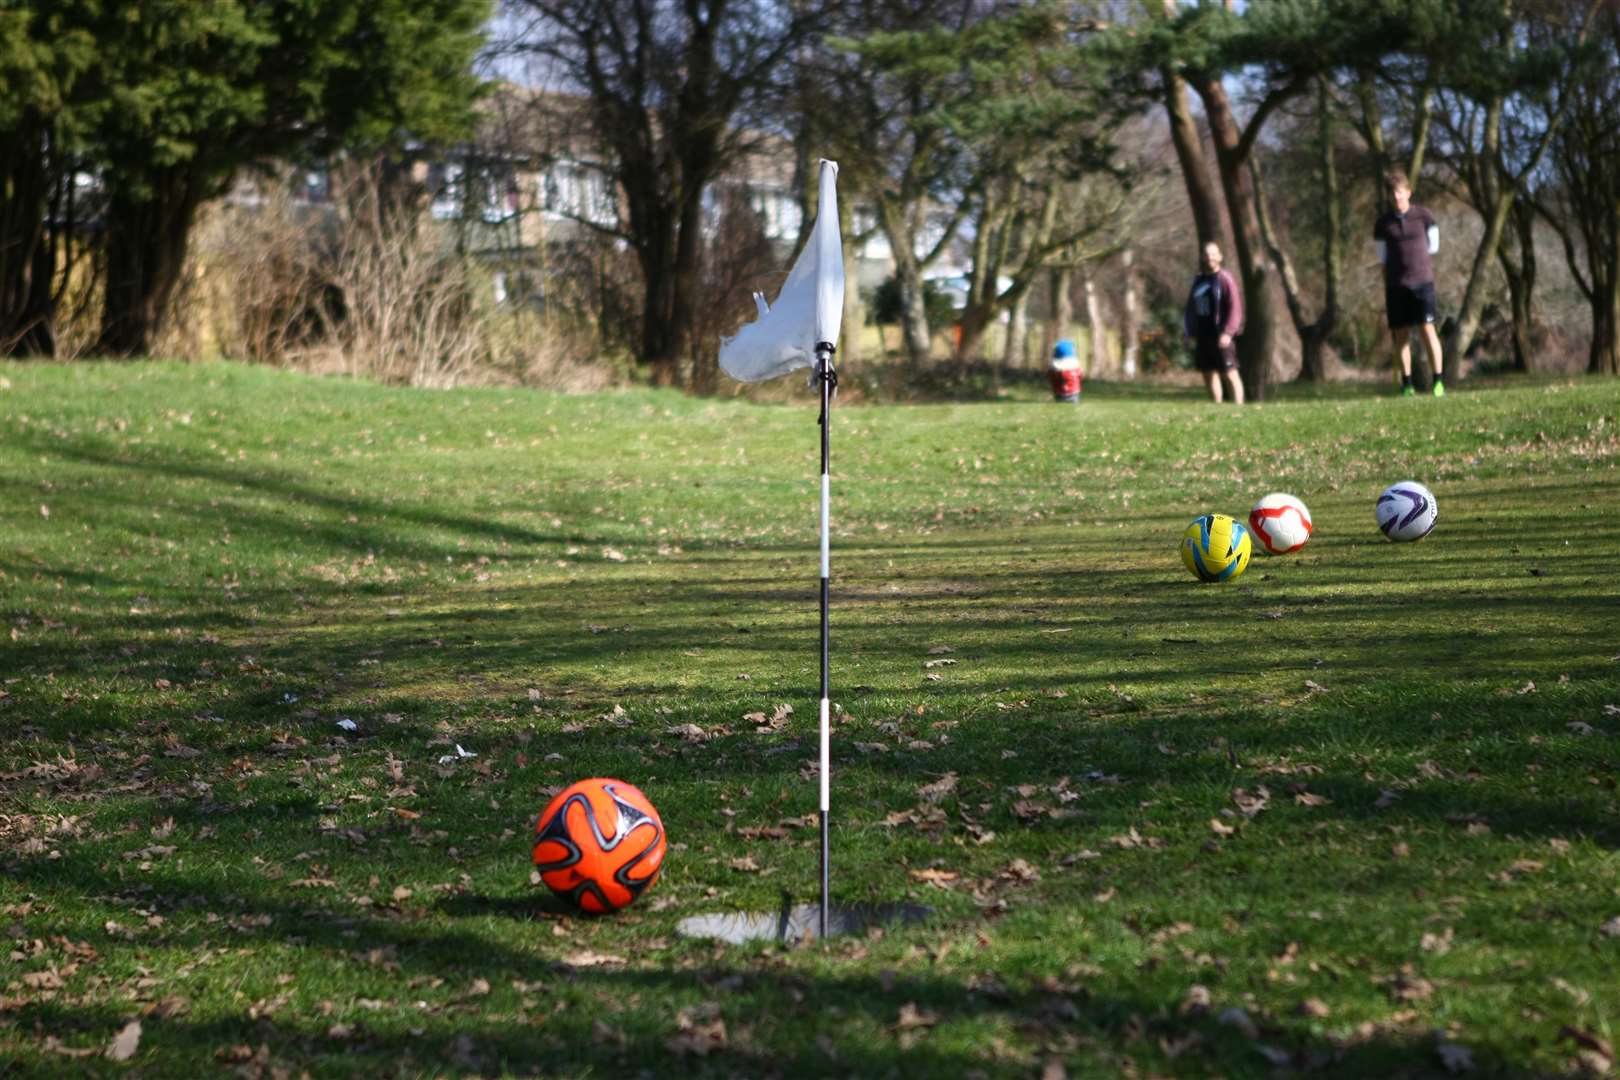 The footgolf course at the centre. Picture: Matt Bristow